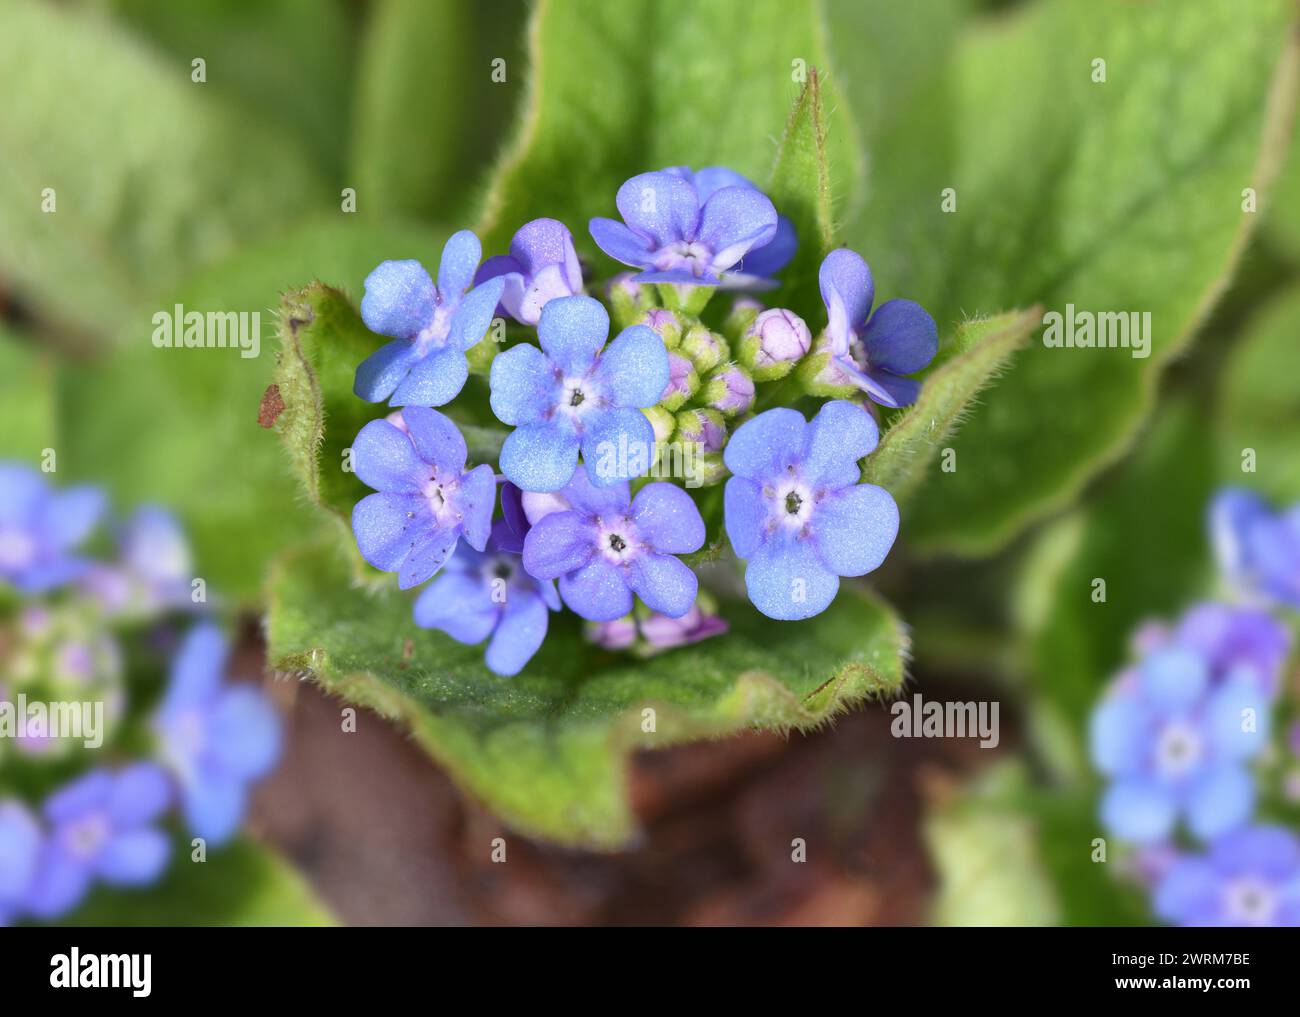 Great Forget-me-not - Brunnera macrophylla Stock Photo